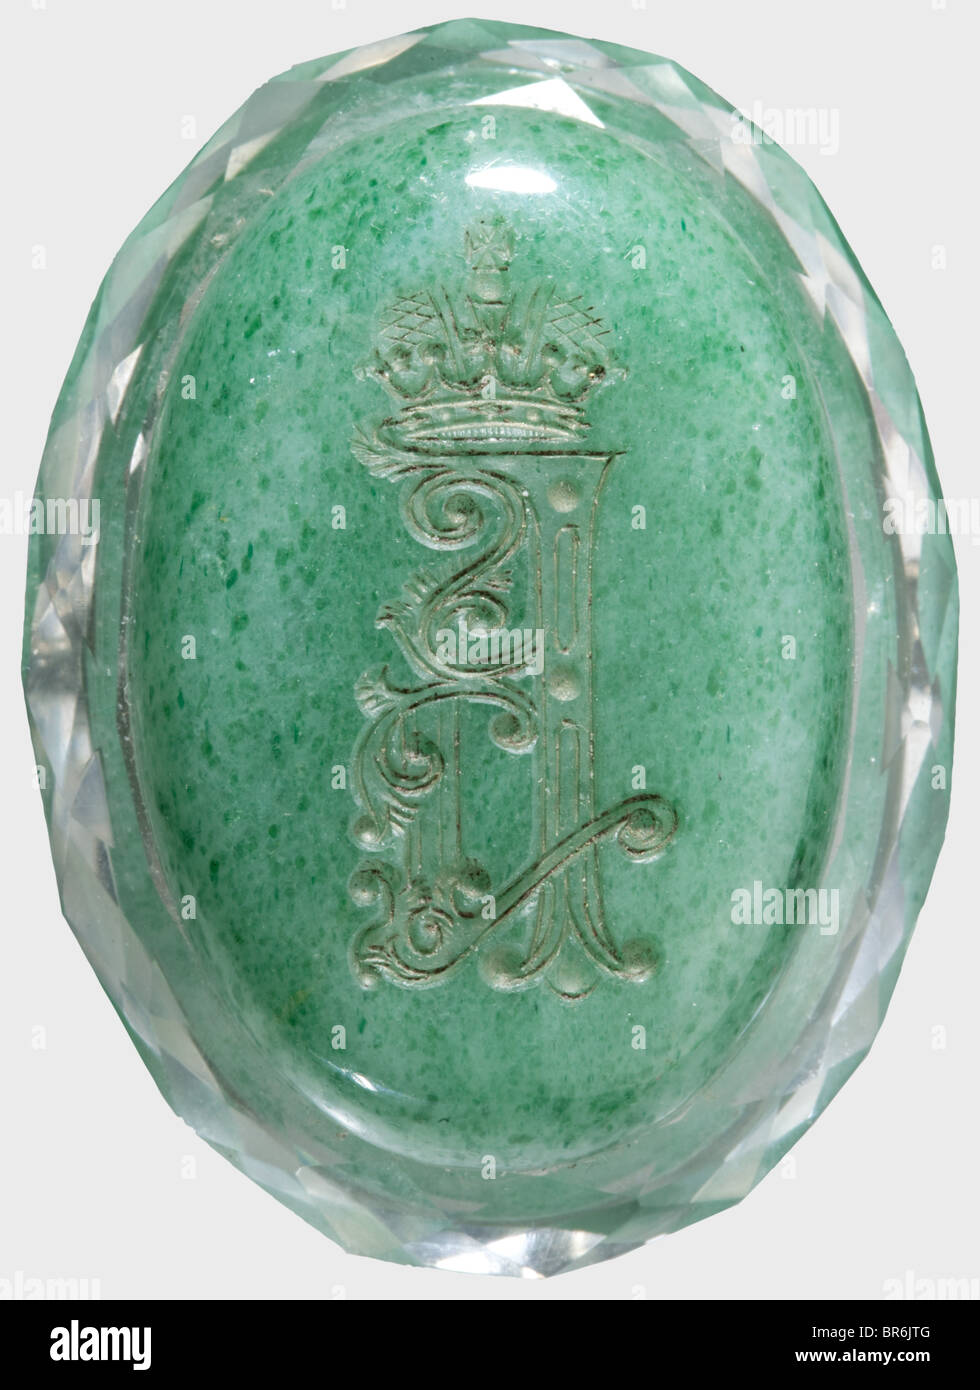 Grand Duchess Vera Konstantinovna Romanova (1854 - 1912) - an umbrella handle with jewel knob, presumably German, 2nd half of the 19th century. Green aventurine knob set with two faceted rock crystal rings. The pommel cap bears a cut seal monogram in the shape of a Cyrillic 'B' under a grand ducal coronet. The shaft is made of Karelian birch with inserted brass threaded socket. Length 29.5 cm. historic, historical, 19th century, object, objects, stills, clipping, clippings, cut out, cut-out, cut-outs, Stock Photo